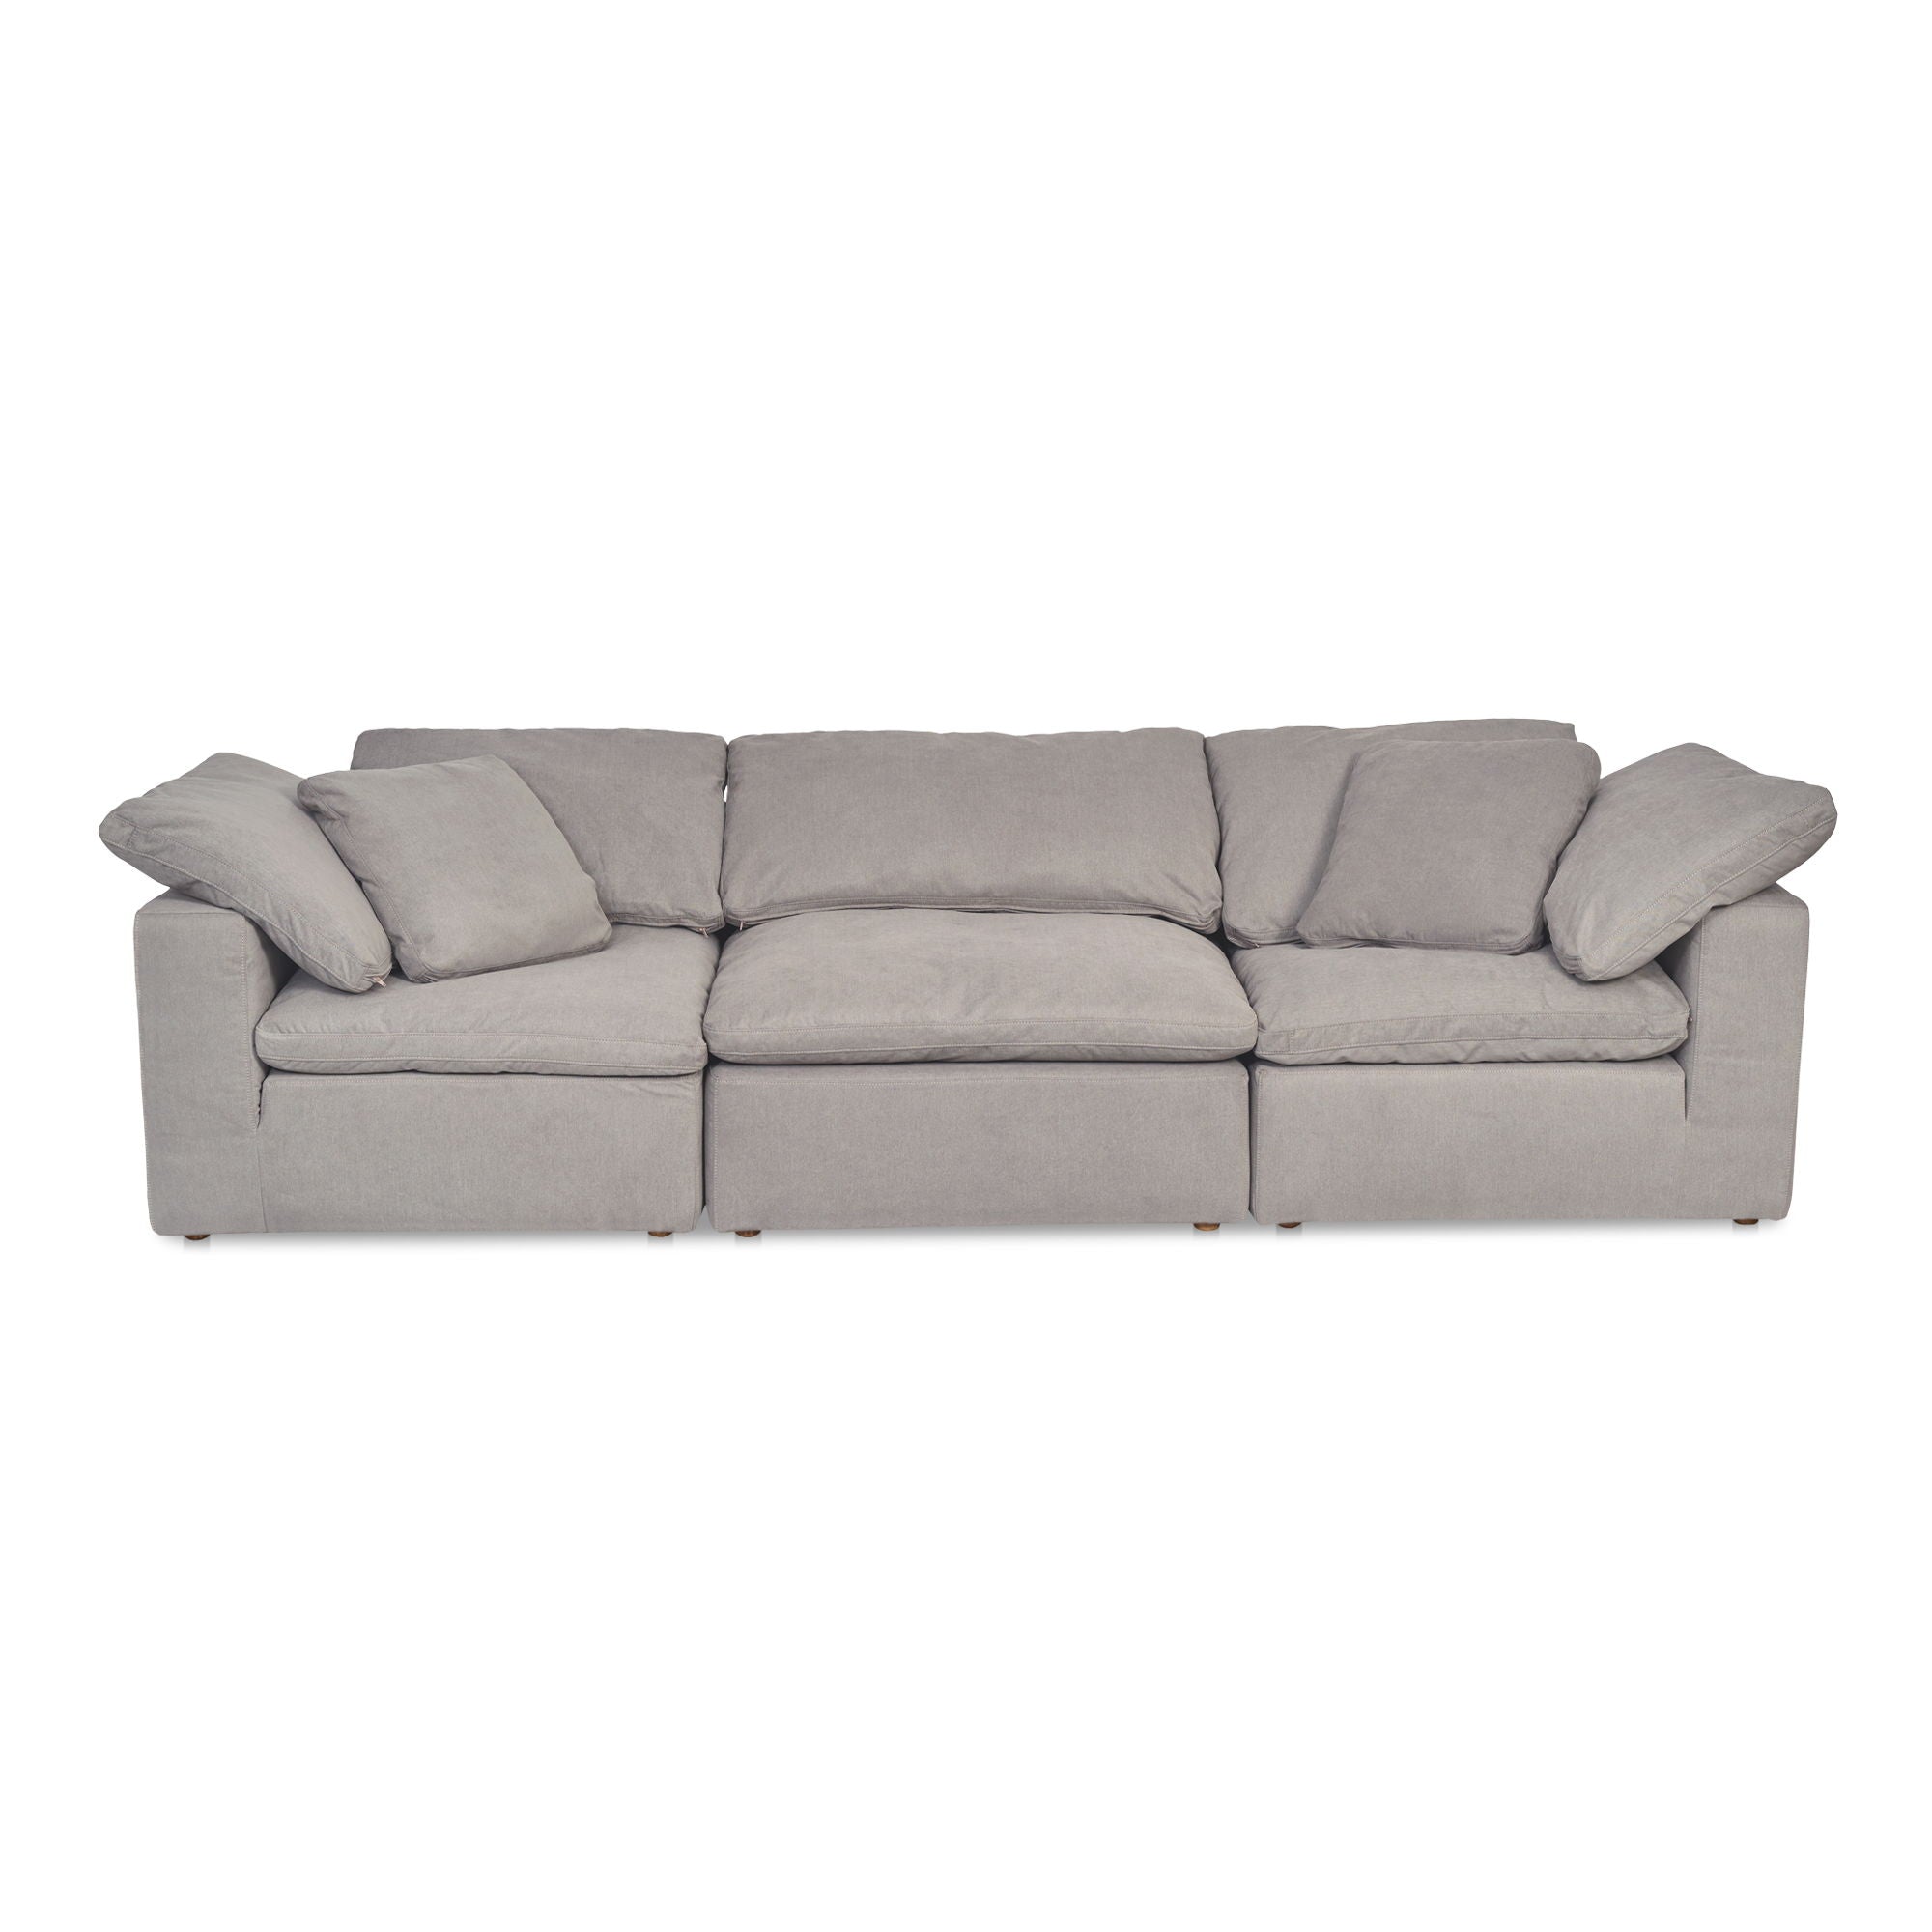 Terra - Modular Sofa Performance Fabric - Light Grey-Stationary Sectionals-American Furniture Outlet